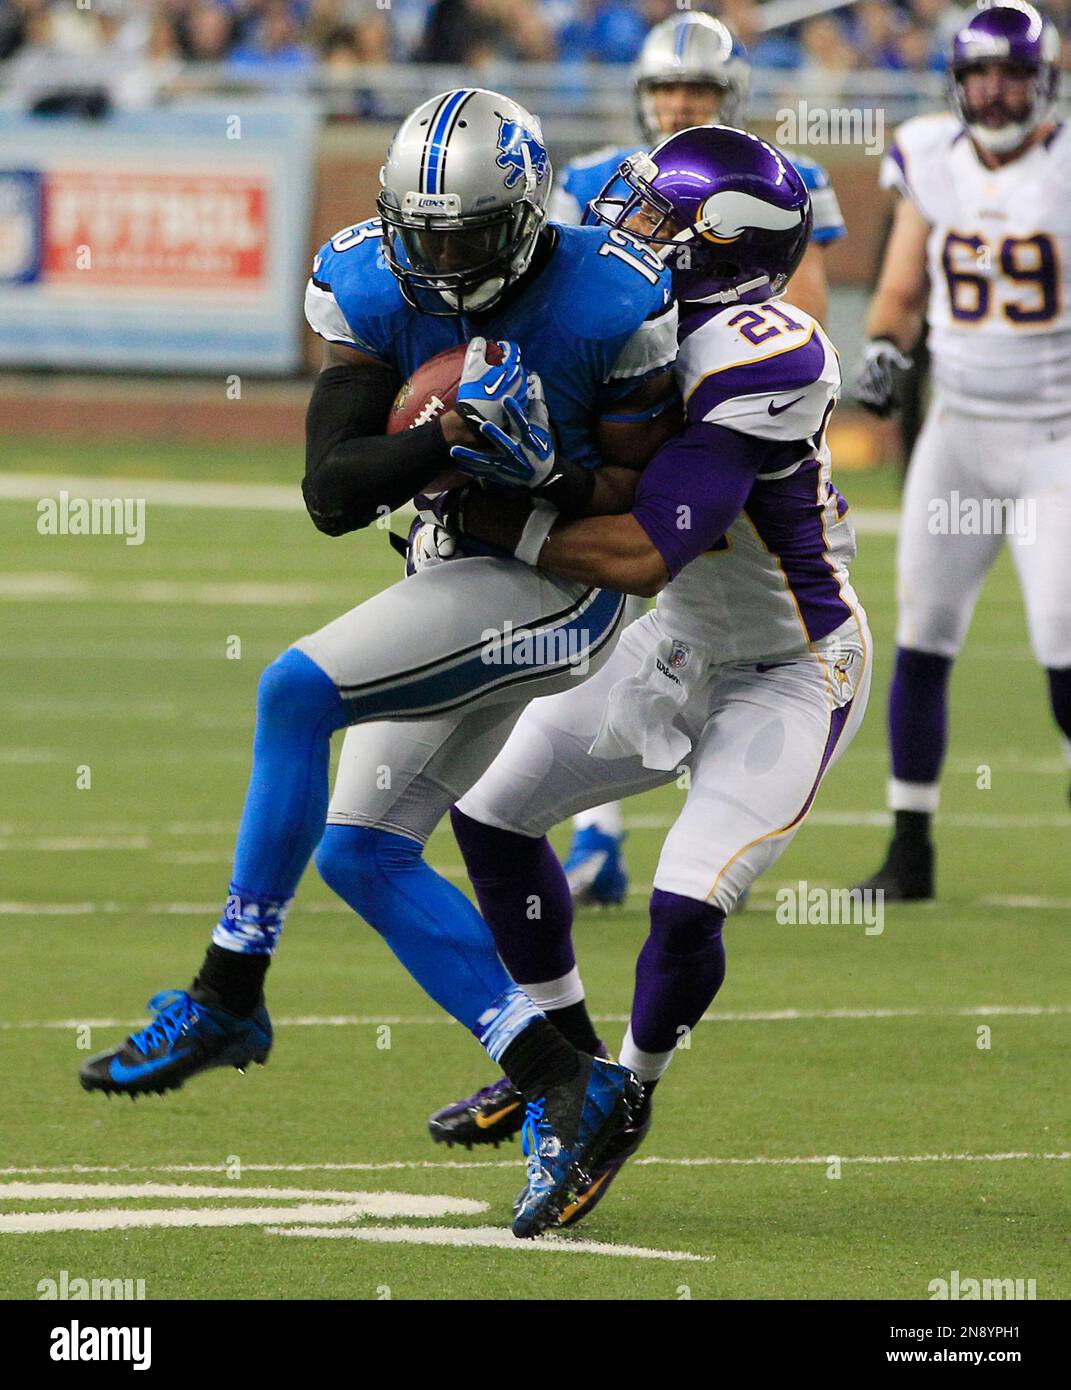 Detroit Lions wide receiver Nate Burleson (13) is tackled by Minnesota Vikings cornerback Josh Robinson (21) during the second quarter of an NFL football game at Ford Field in Detroit, Sunday, Sept. 30, 2012. (AP Photo/Carlos Osorio) Stock Photo